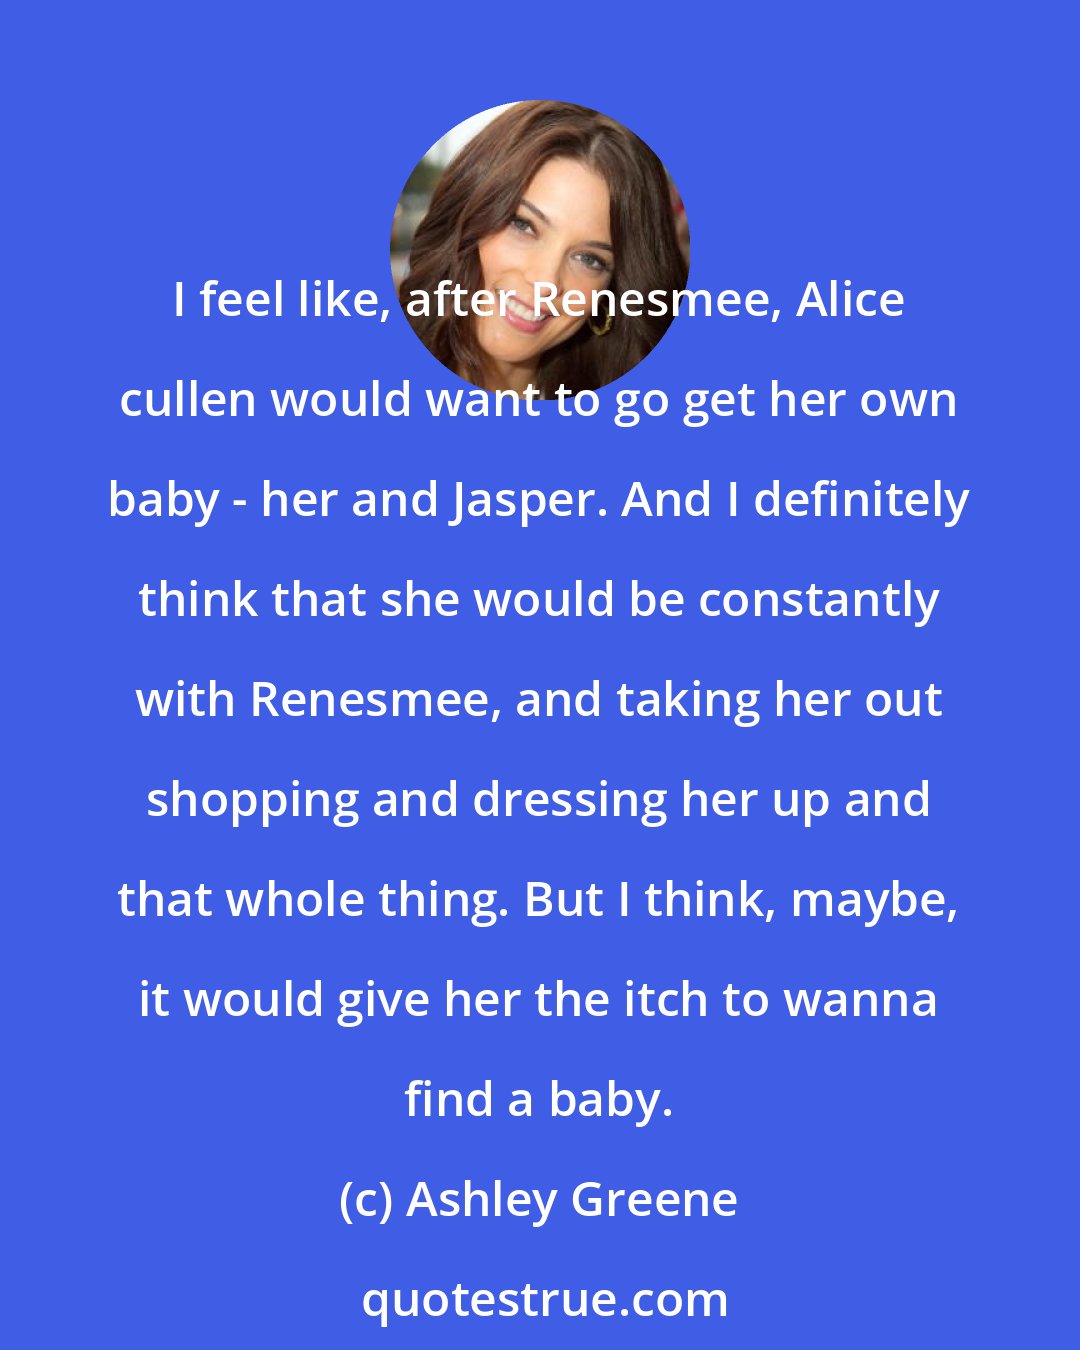 Ashley Greene: I feel like, after Renesmee, Alice cullen would want to go get her own baby - her and Jasper. And I definitely think that she would be constantly with Renesmee, and taking her out shopping and dressing her up and that whole thing. But I think, maybe, it would give her the itch to wanna find a baby.